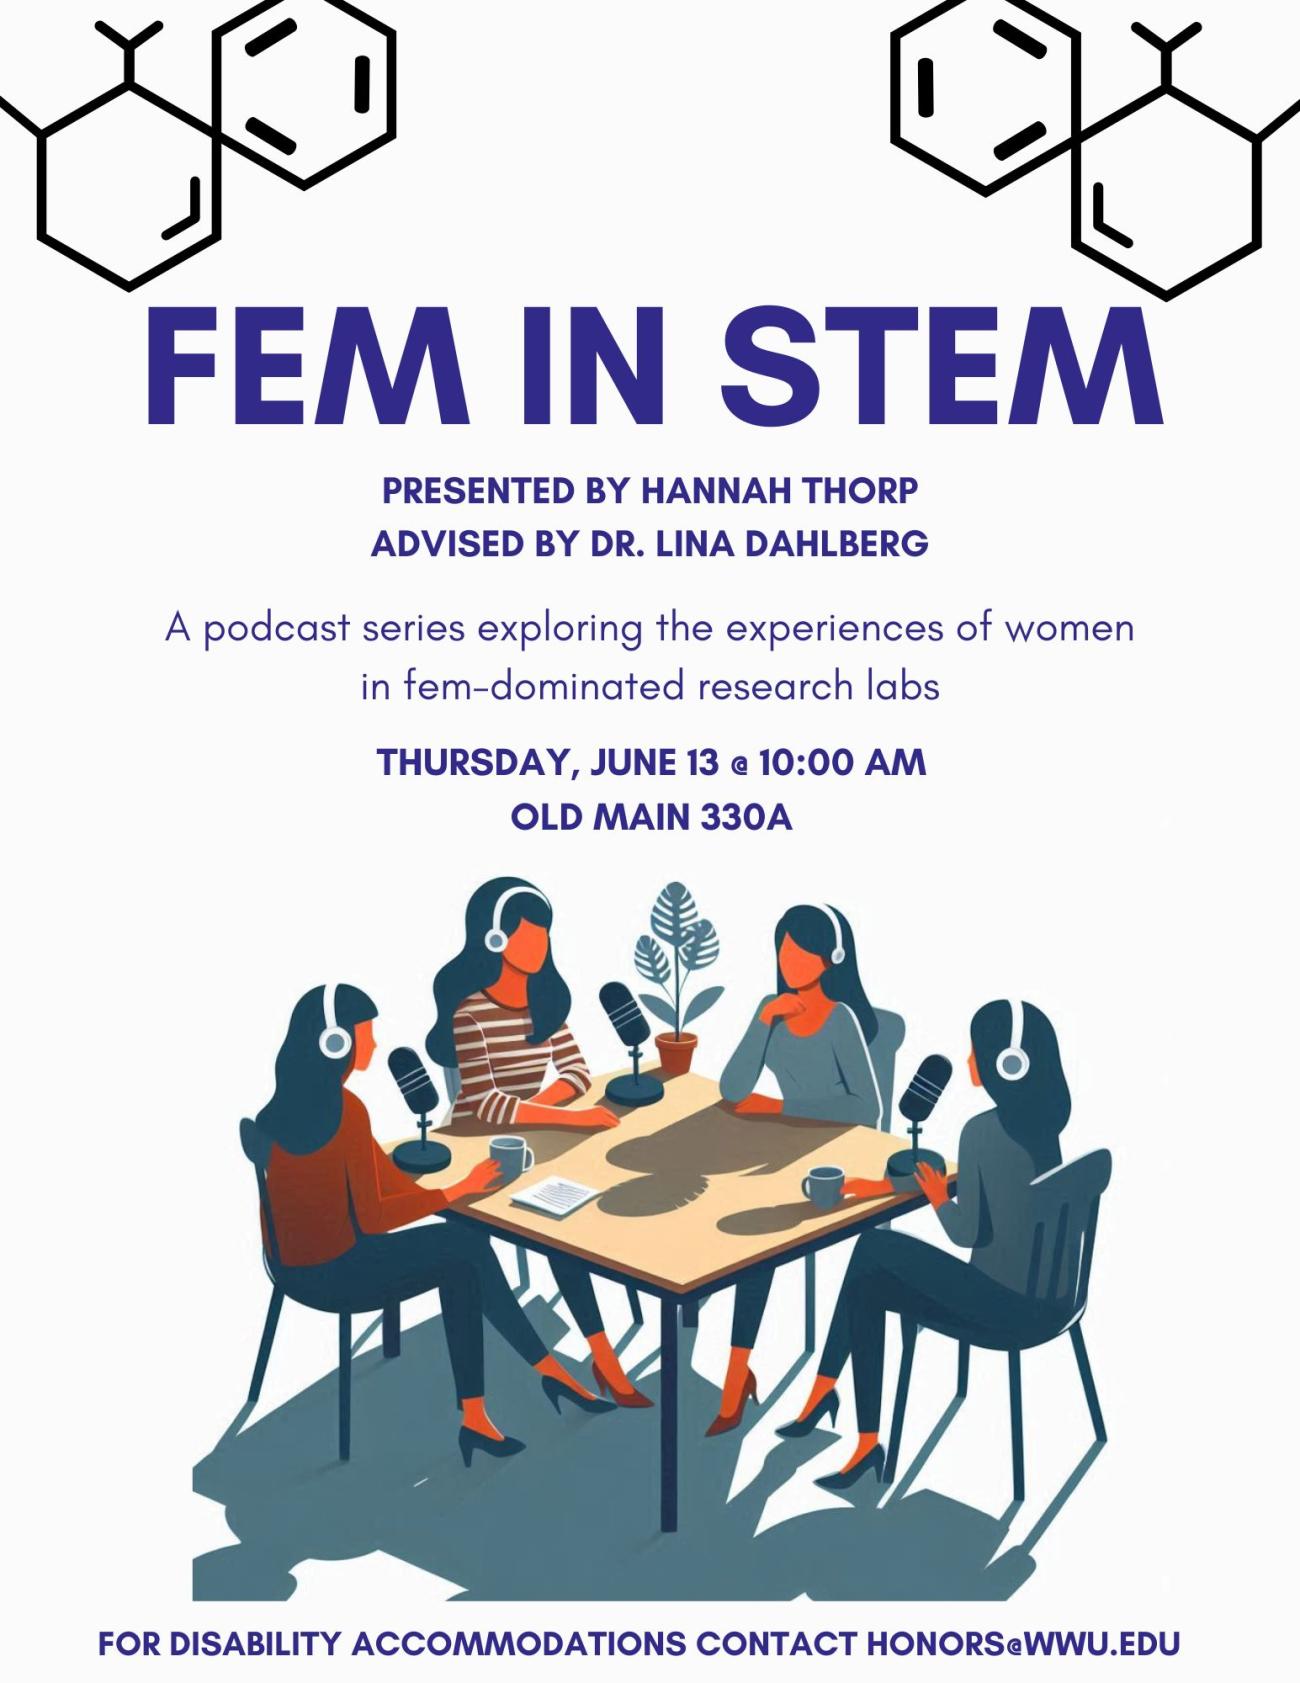 4 women sitting around a table with microphones. Organic molecules are featured at the top of the page against a white background. Text reads, "Fem in STEM. Presented by Hannah Thorp, advised by Dr. Lina Dahlberg. A podcast series exploring the experiences of women in fem-dominated research labs. Thursday, June 13 at 10:00 am. Old Main 330A. For disability accommodations contact honors@wwu.edu."